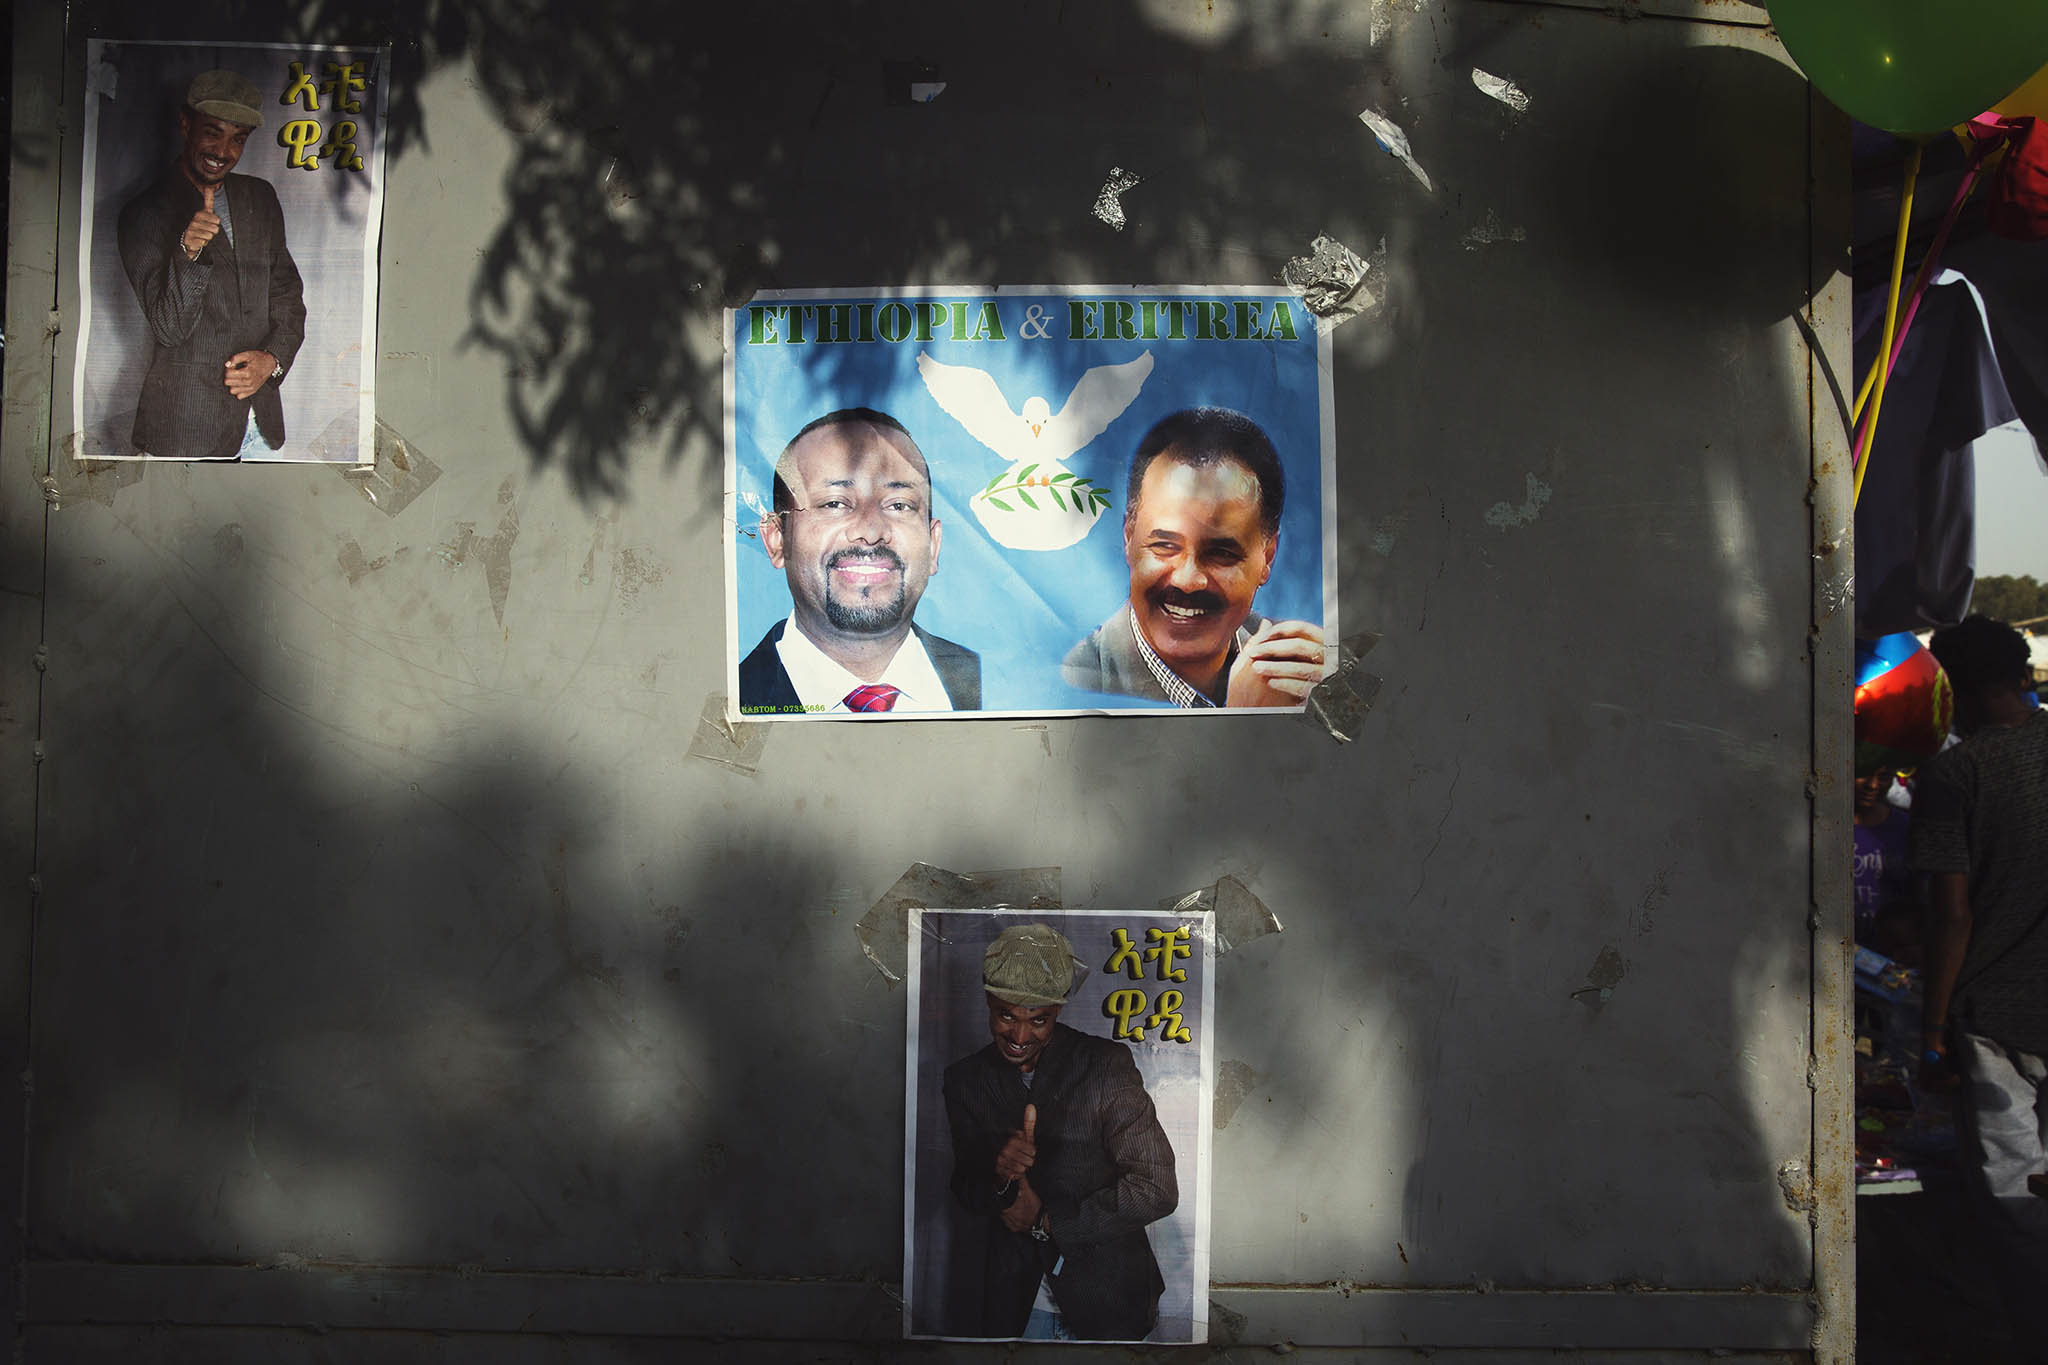 A poster depicts Ethiopian Prime Minister Abiy Ahmed (left) and Eritrean President Isaias Afwerki in Asmara, Eritrea, on September 7, 2018. Tensions between the two countries have been rising again. (Malin Fezehai/The New York Times)